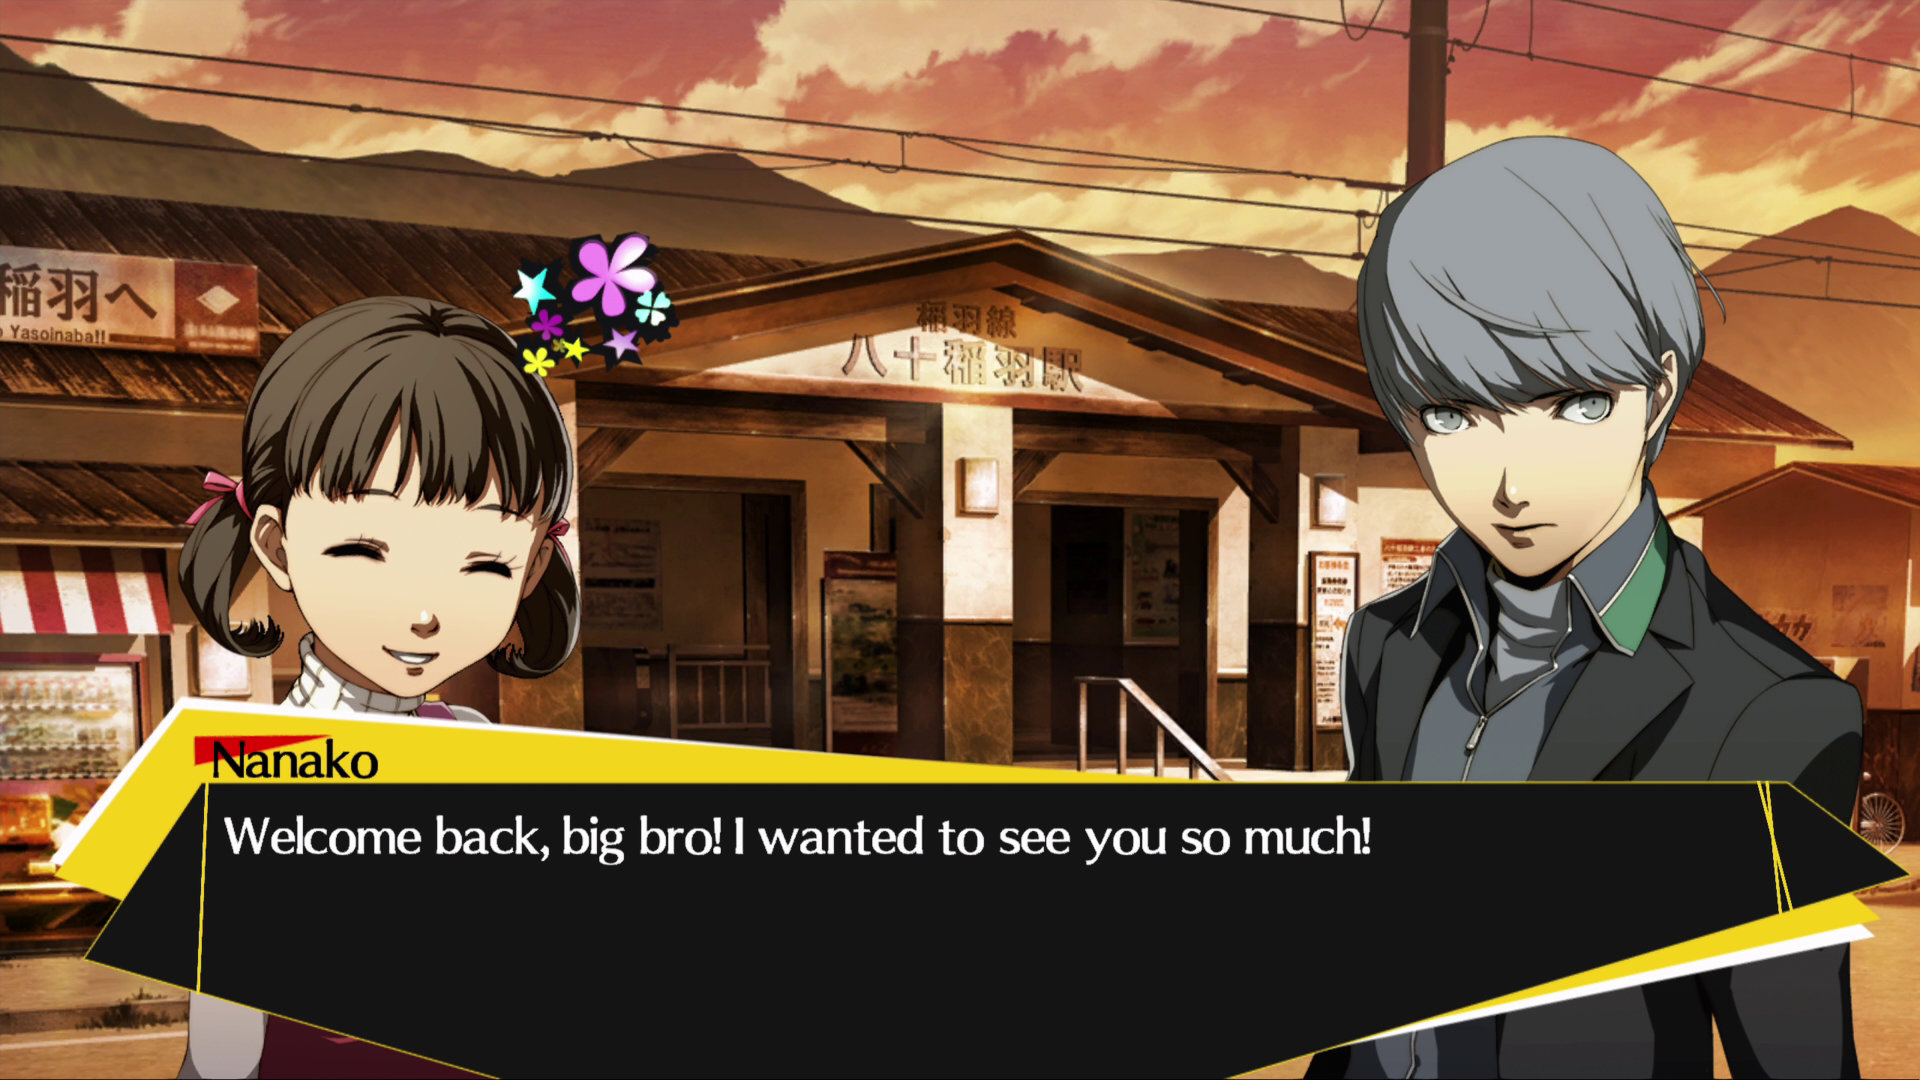 Persona 4 Arena Ultimax - New 2D anime fighting game welcomes